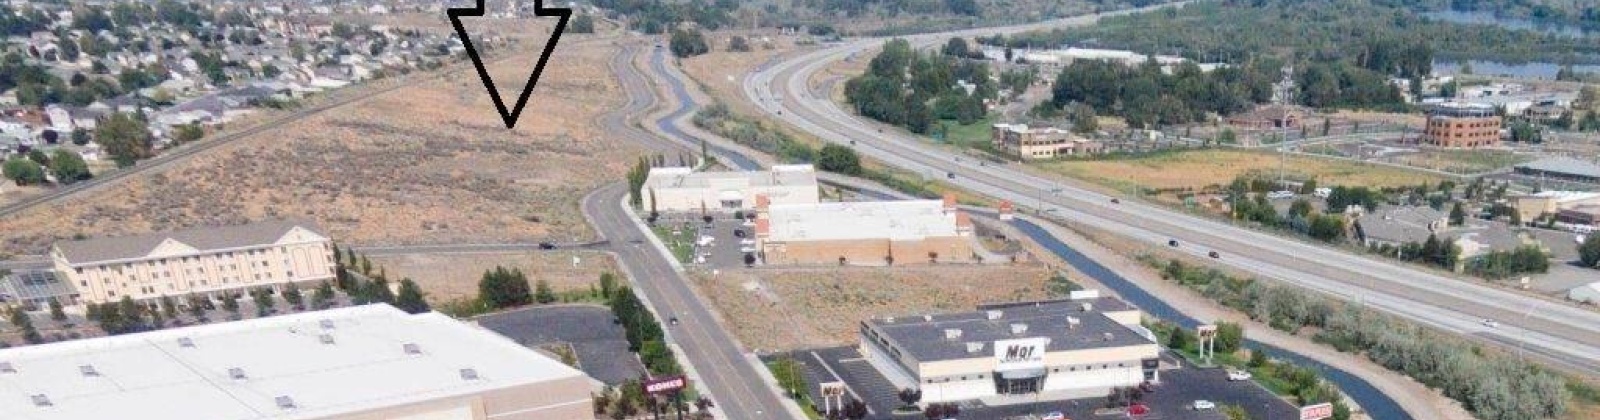 Tapteal Drive, Richland, Washington 99352, ,Commercial,For Sale,Tapteal Drive,201229